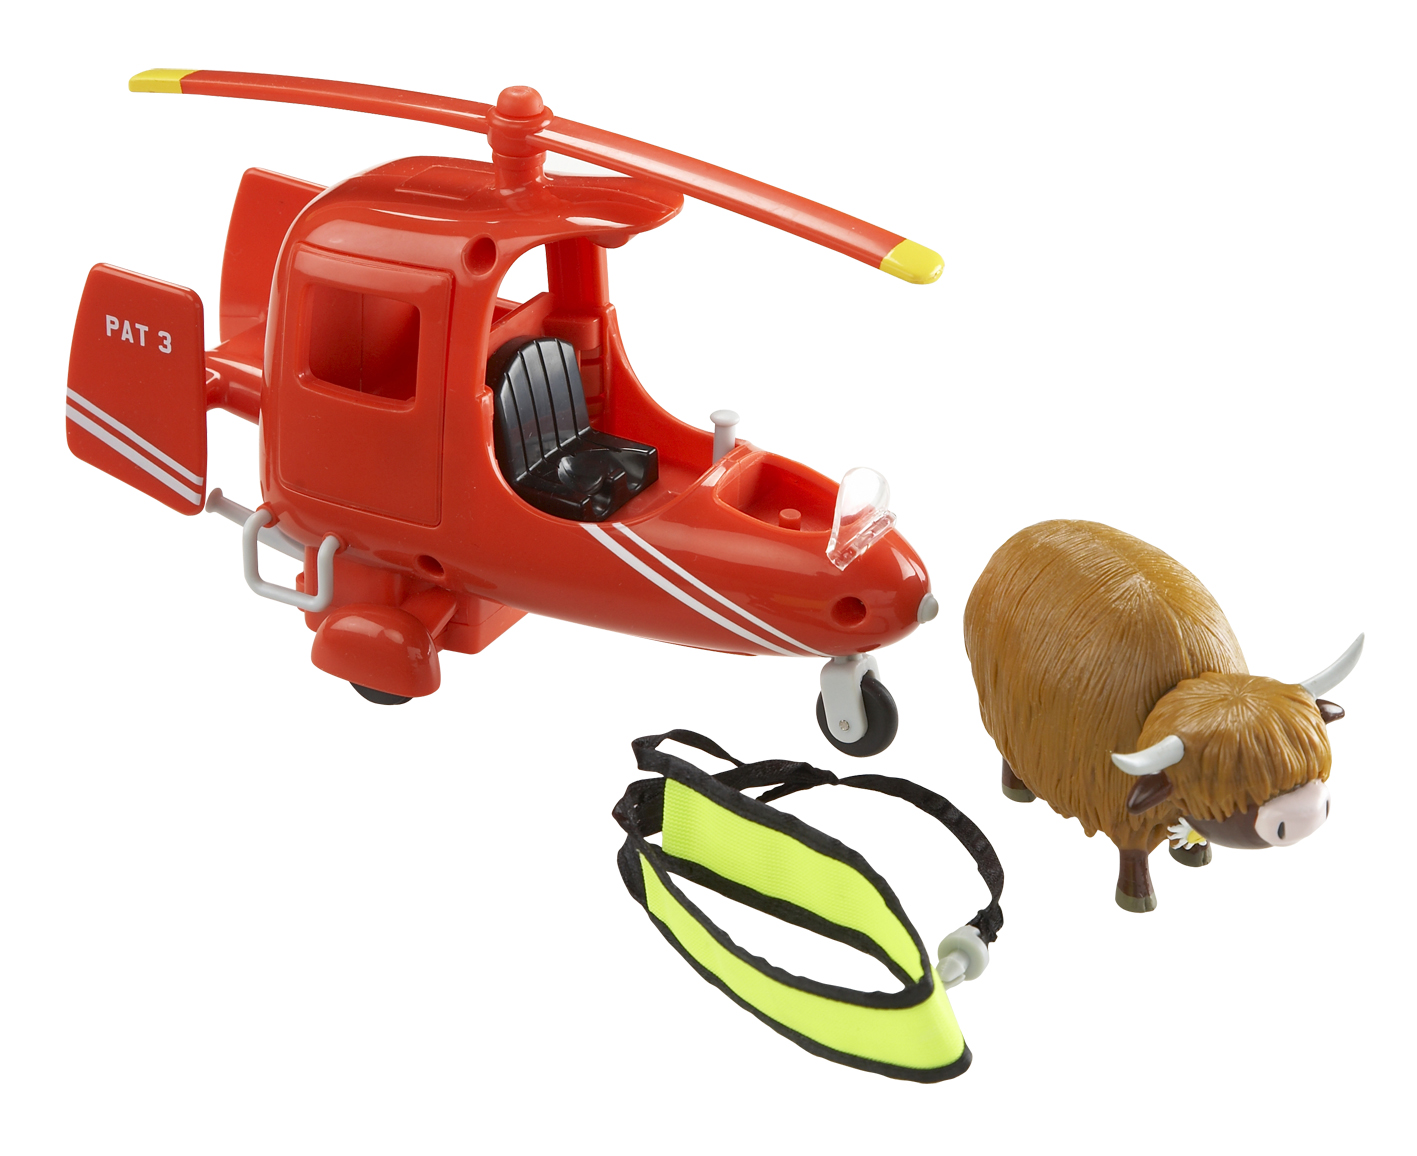 postman pat Vehicle and Access Set- Sds Helicopter